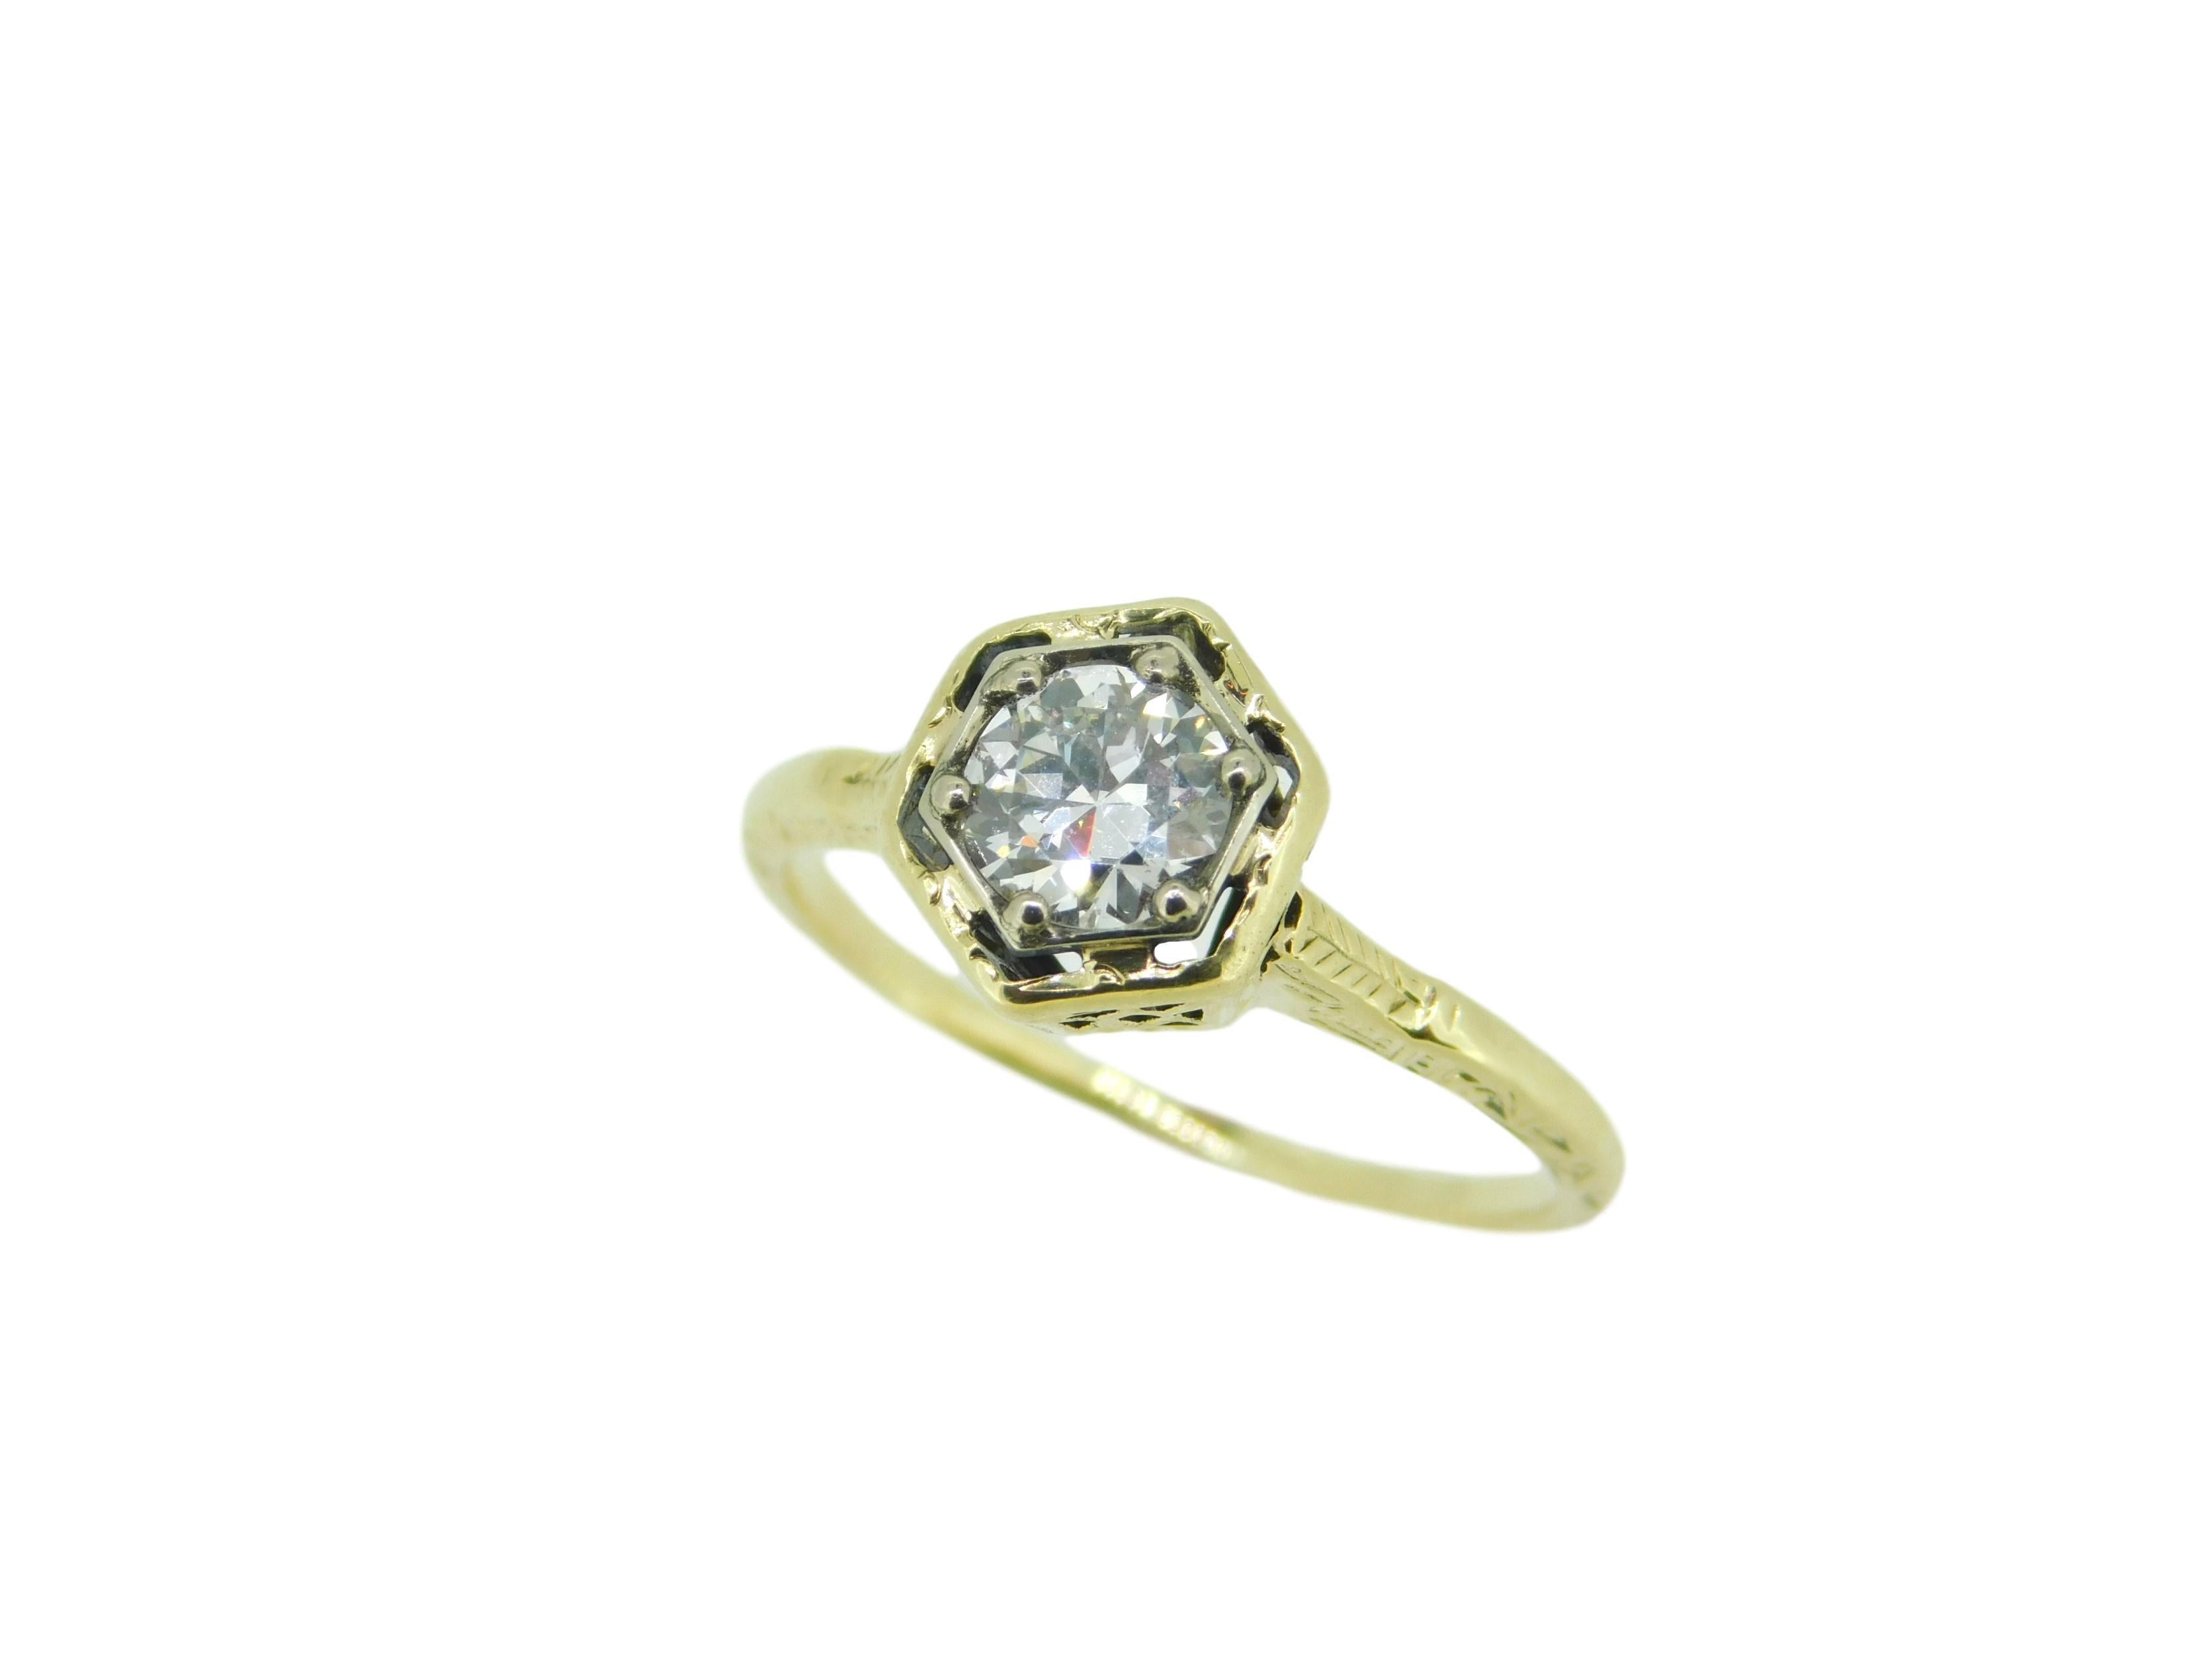 14k Yellow Gold Art Deco 1/2ct Genuine Natural Diamond Ring (#J4629)

Art Deco 14k yellow gold diamond ring featuring a round brilliant cut diamond weighing .52cts and measuring about 5mm. The diamond has H color and VS2 clarity. The antique yellow